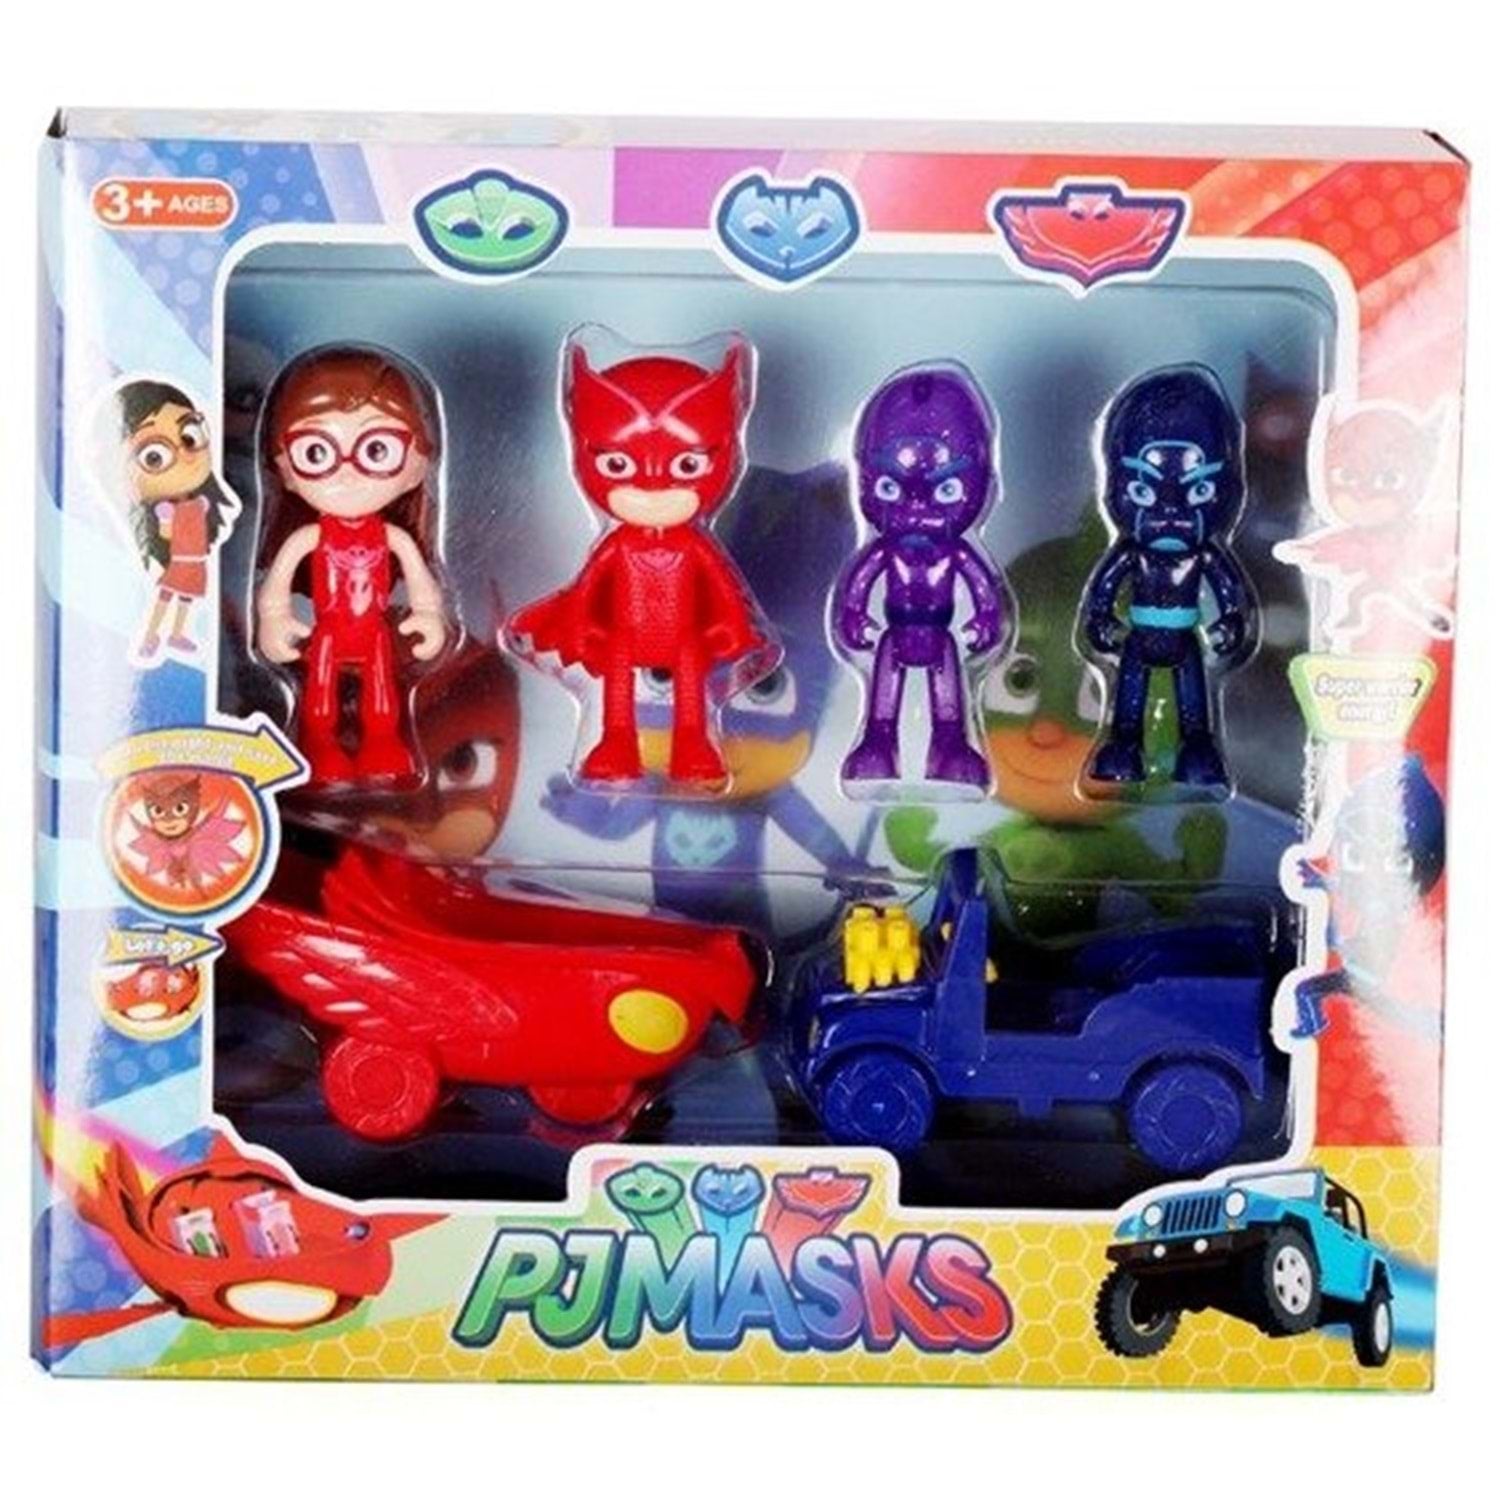 PJ Masks 2 Action Figures Play Set With 2 Cars